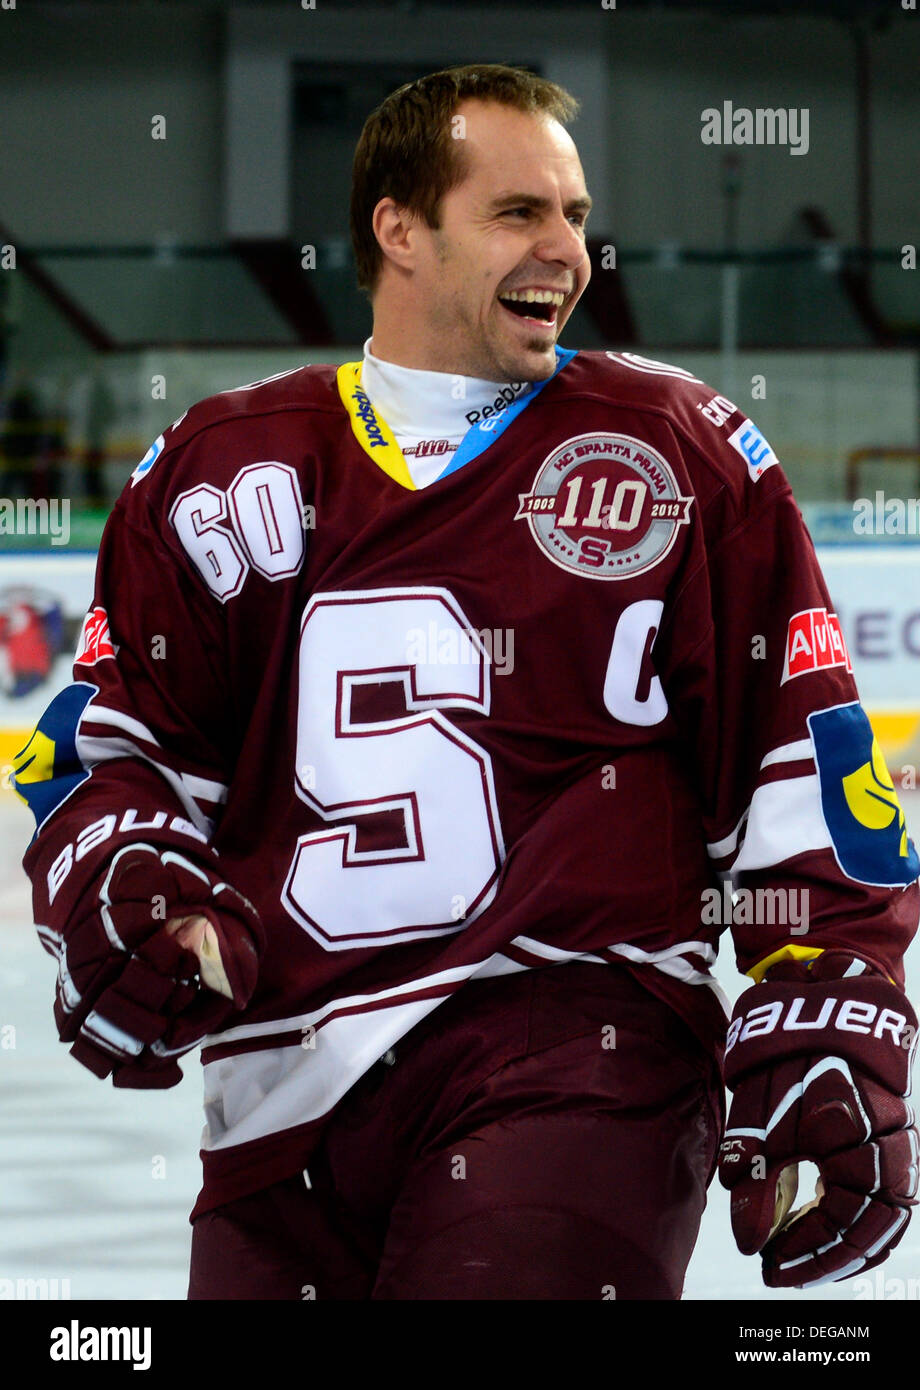 New jerseys of hockey club Sparta Prague, which reminds one hundred and  tenth anniversary of its existence (see patch on the jerseys), were  presented during the shooting of team in Prague, Czech